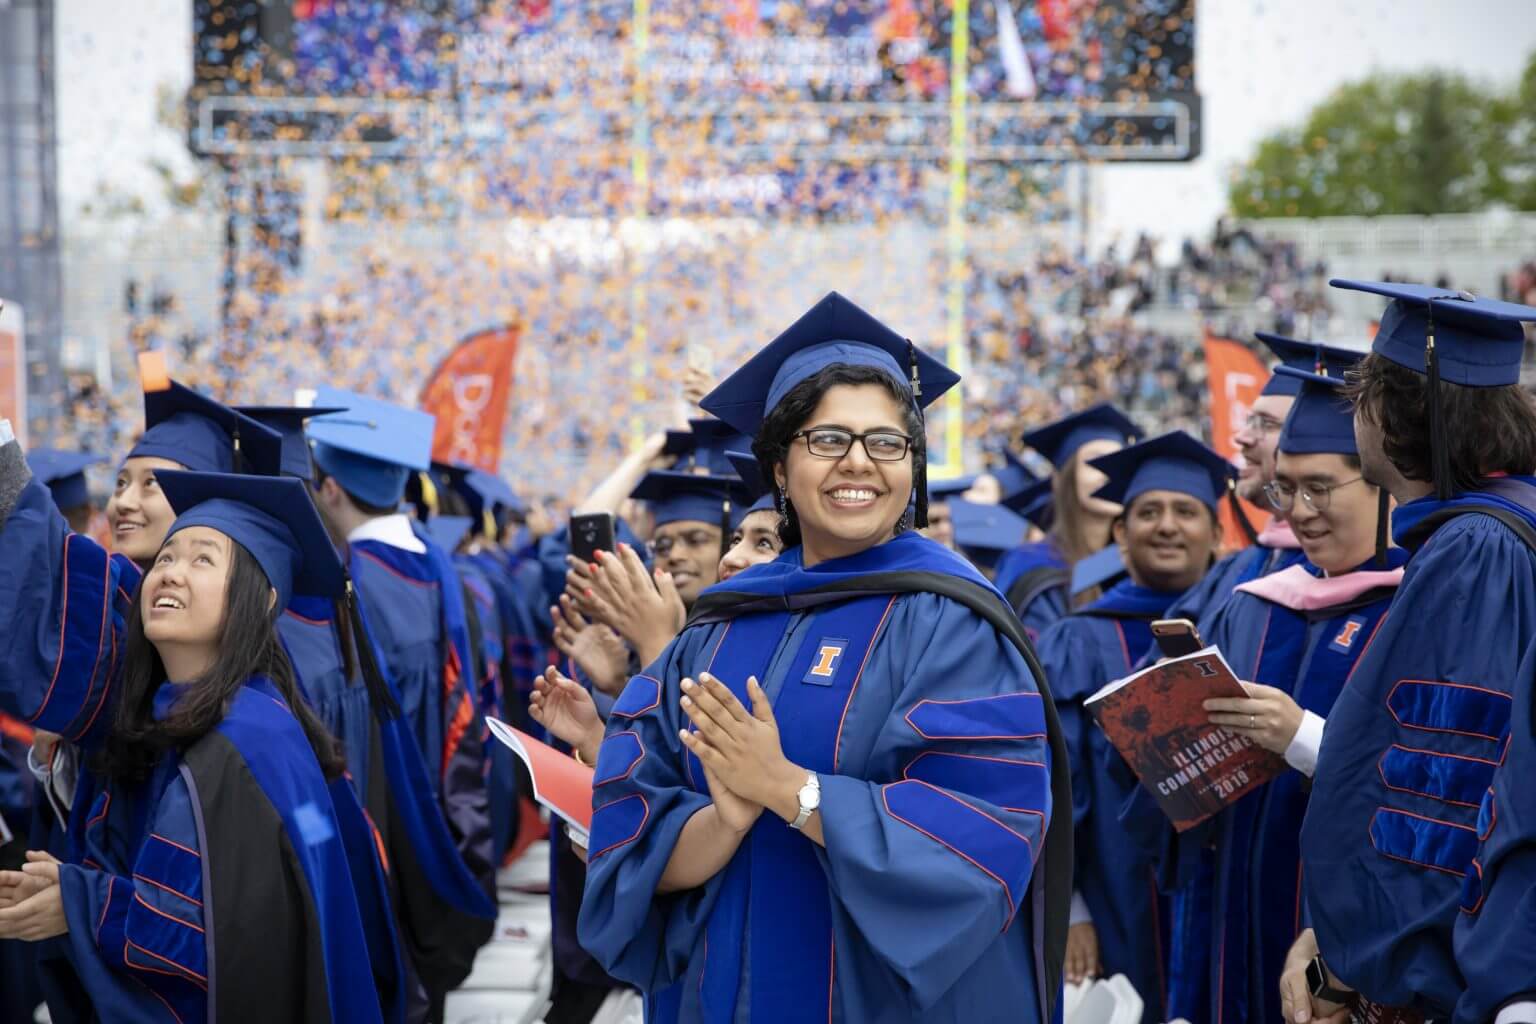 A female doctoral student smiles during the confetti toss at the end of the University of Illinois Commencement at Memorial Stadium, May 11, 2019.